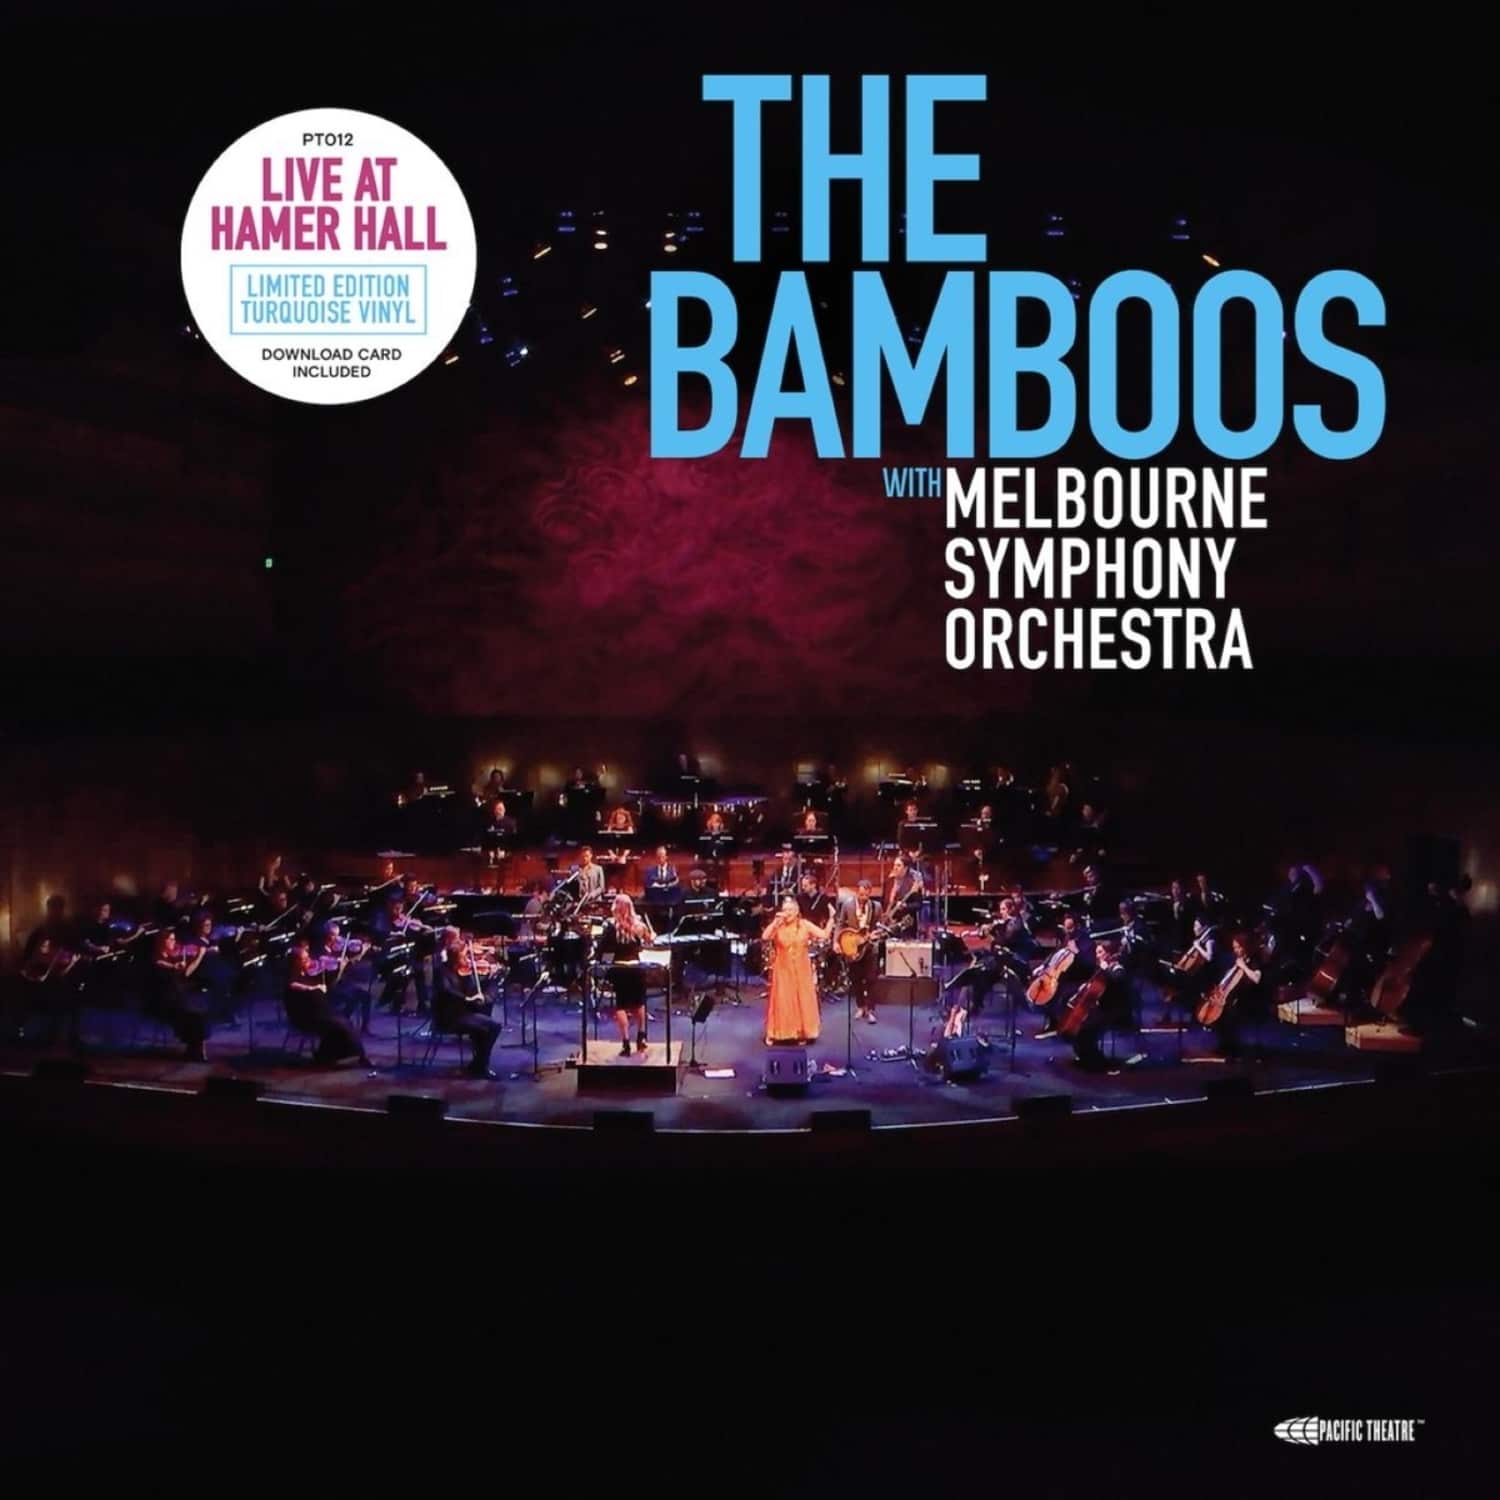 The w.Melbourne Symphony Orchestra Bamboos - LIVE AT HAMER HALL 